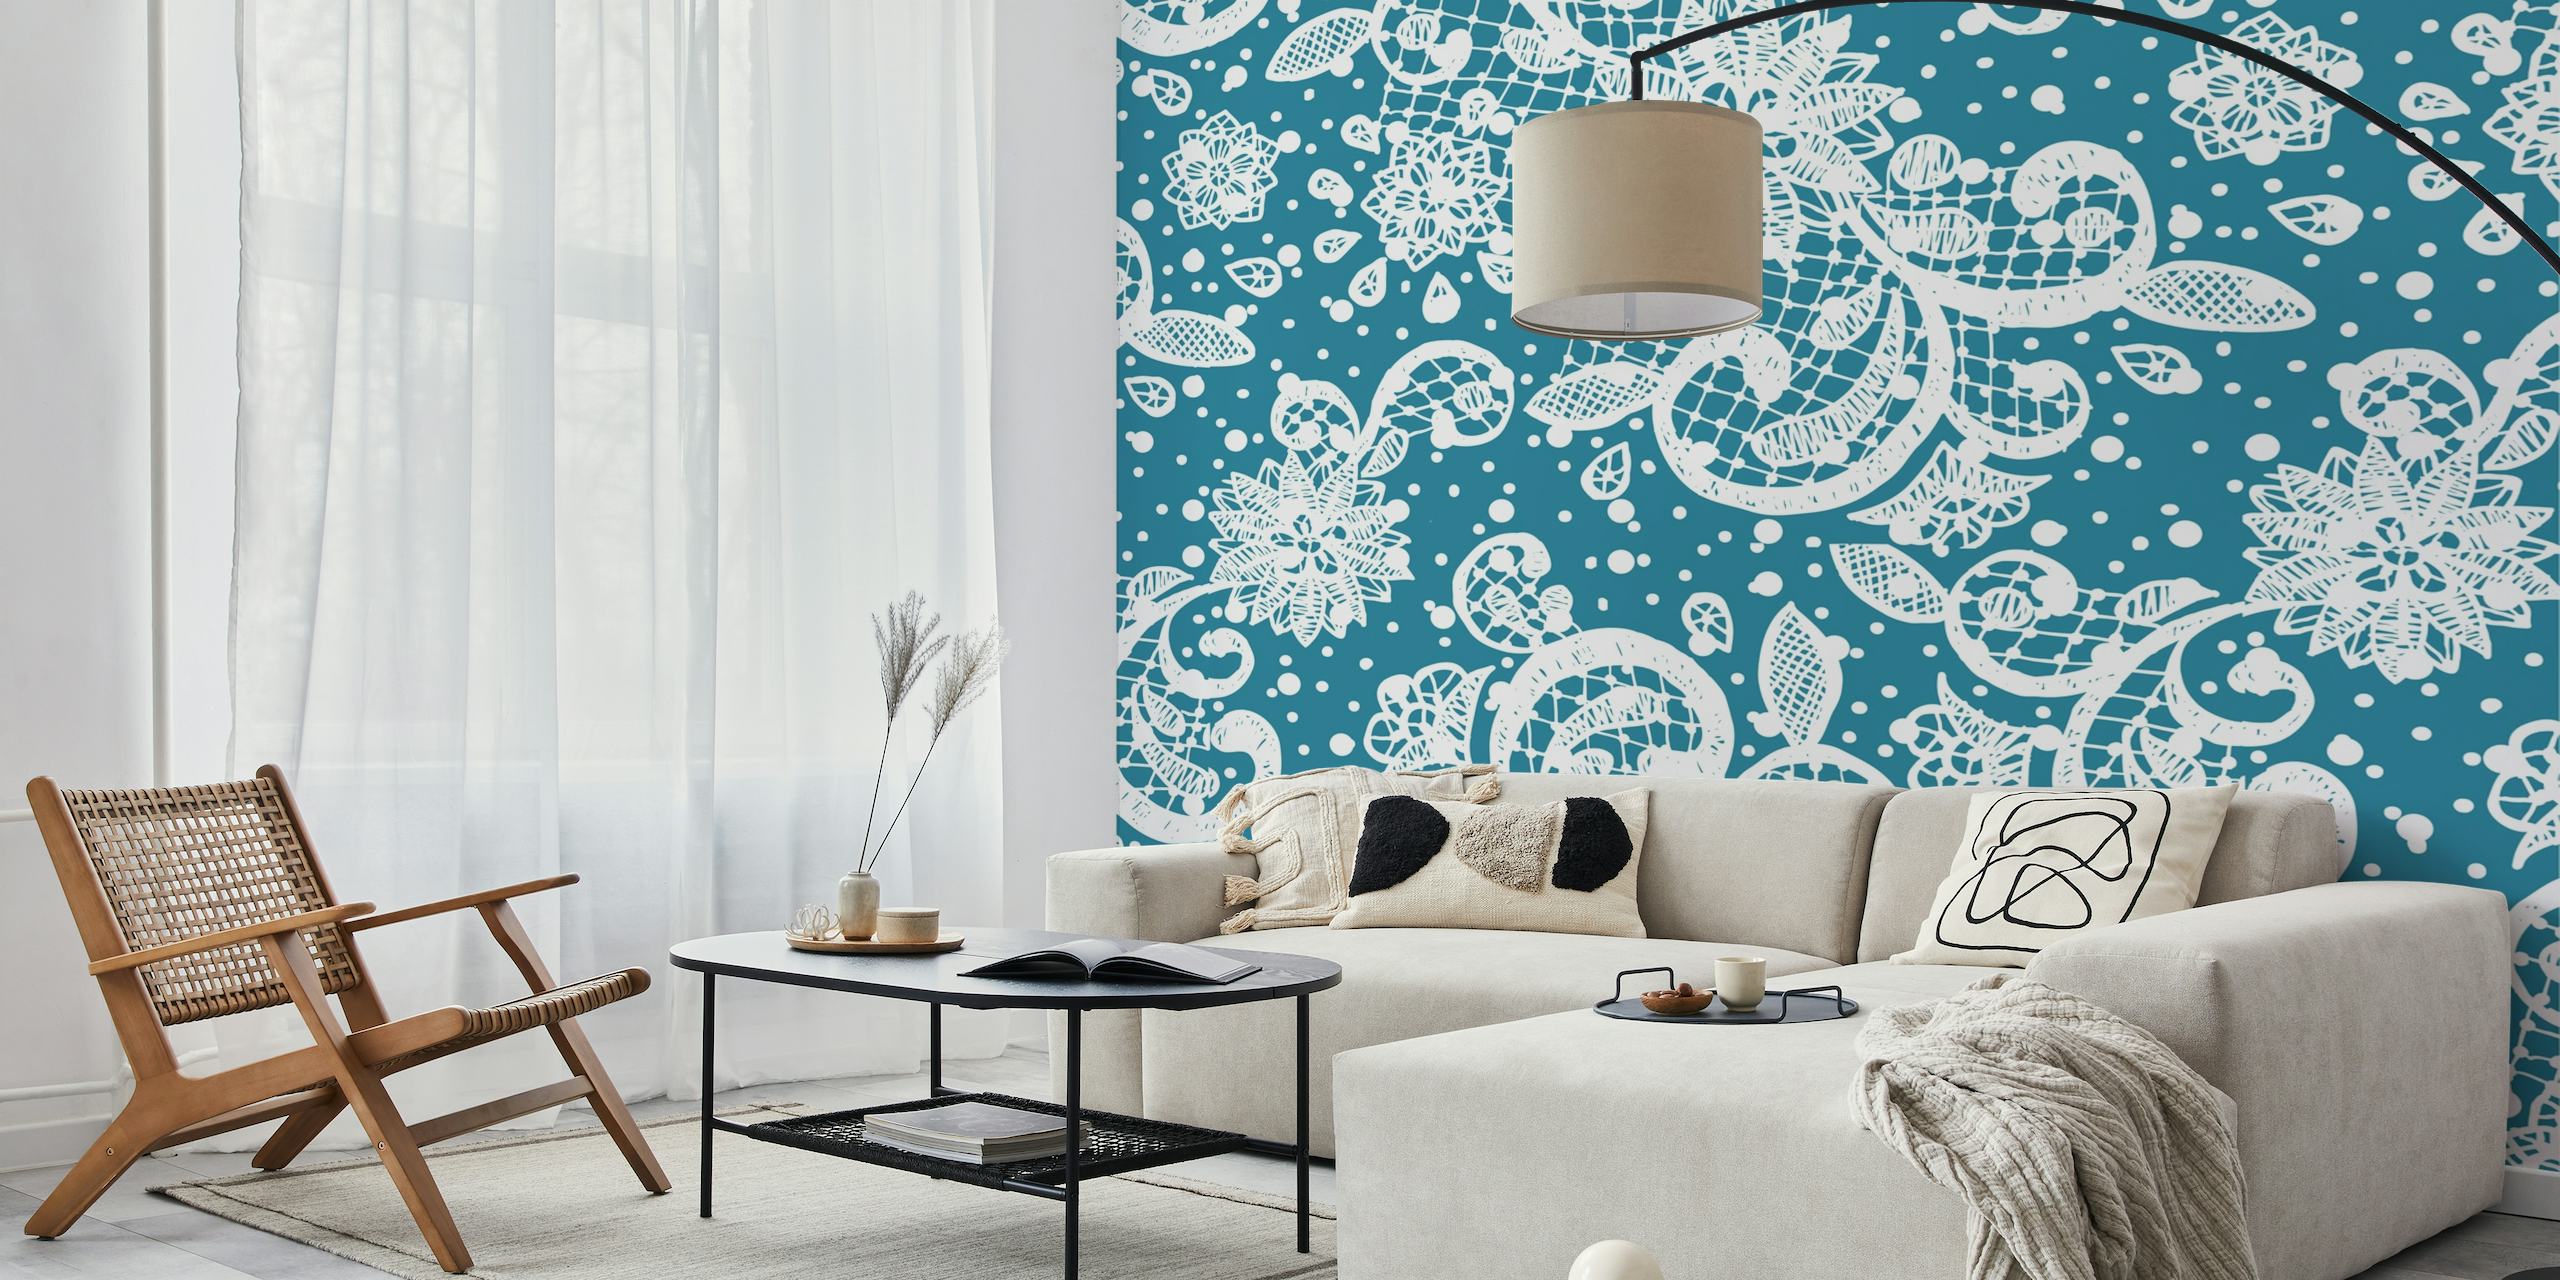 White Lace Classic Ornament wall mural featuring delicate white patterns on a blue background.